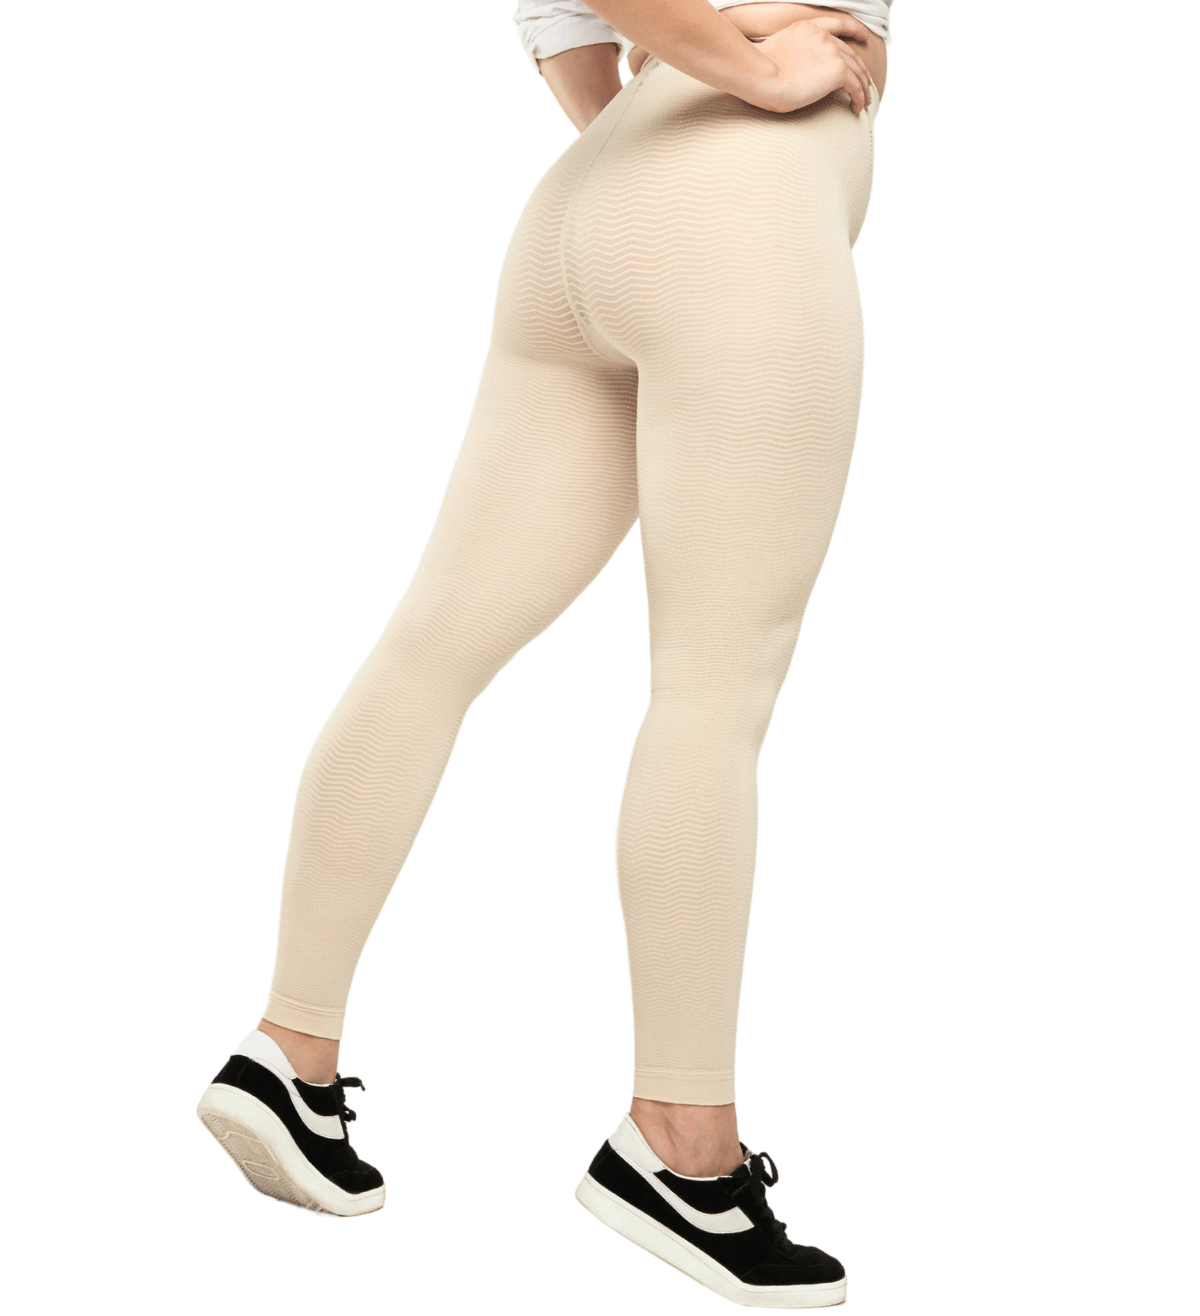 Select Support - Compression Tights Women 6406W – Chris Sports